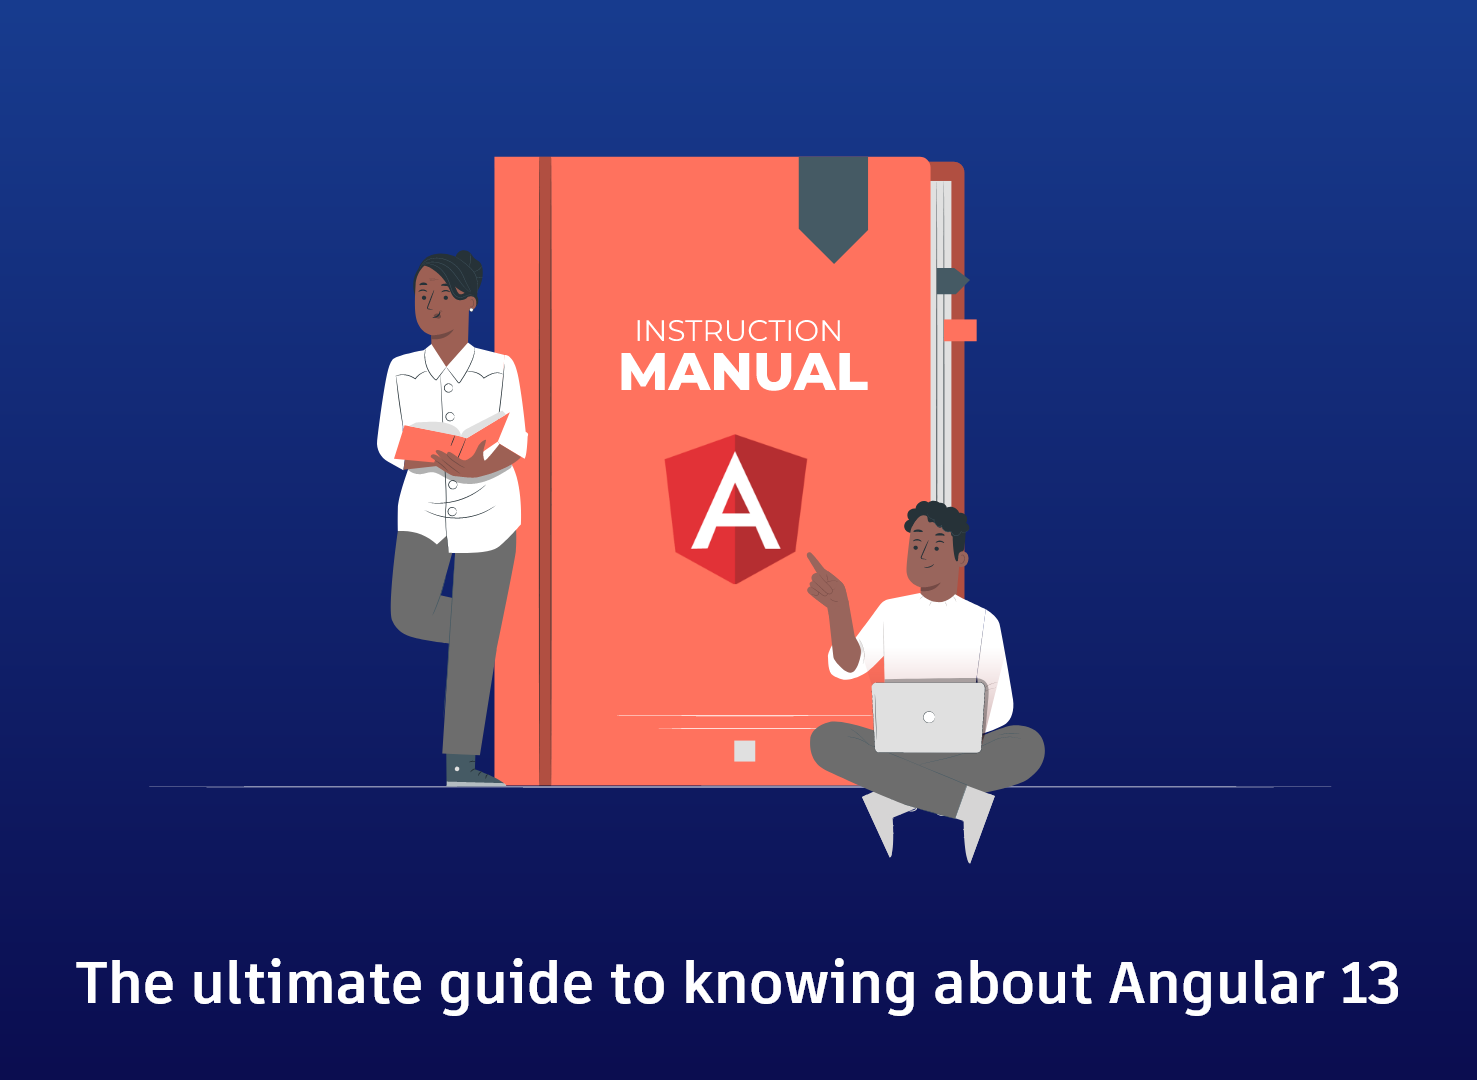 The ultimate guide to knowing about Angular 13